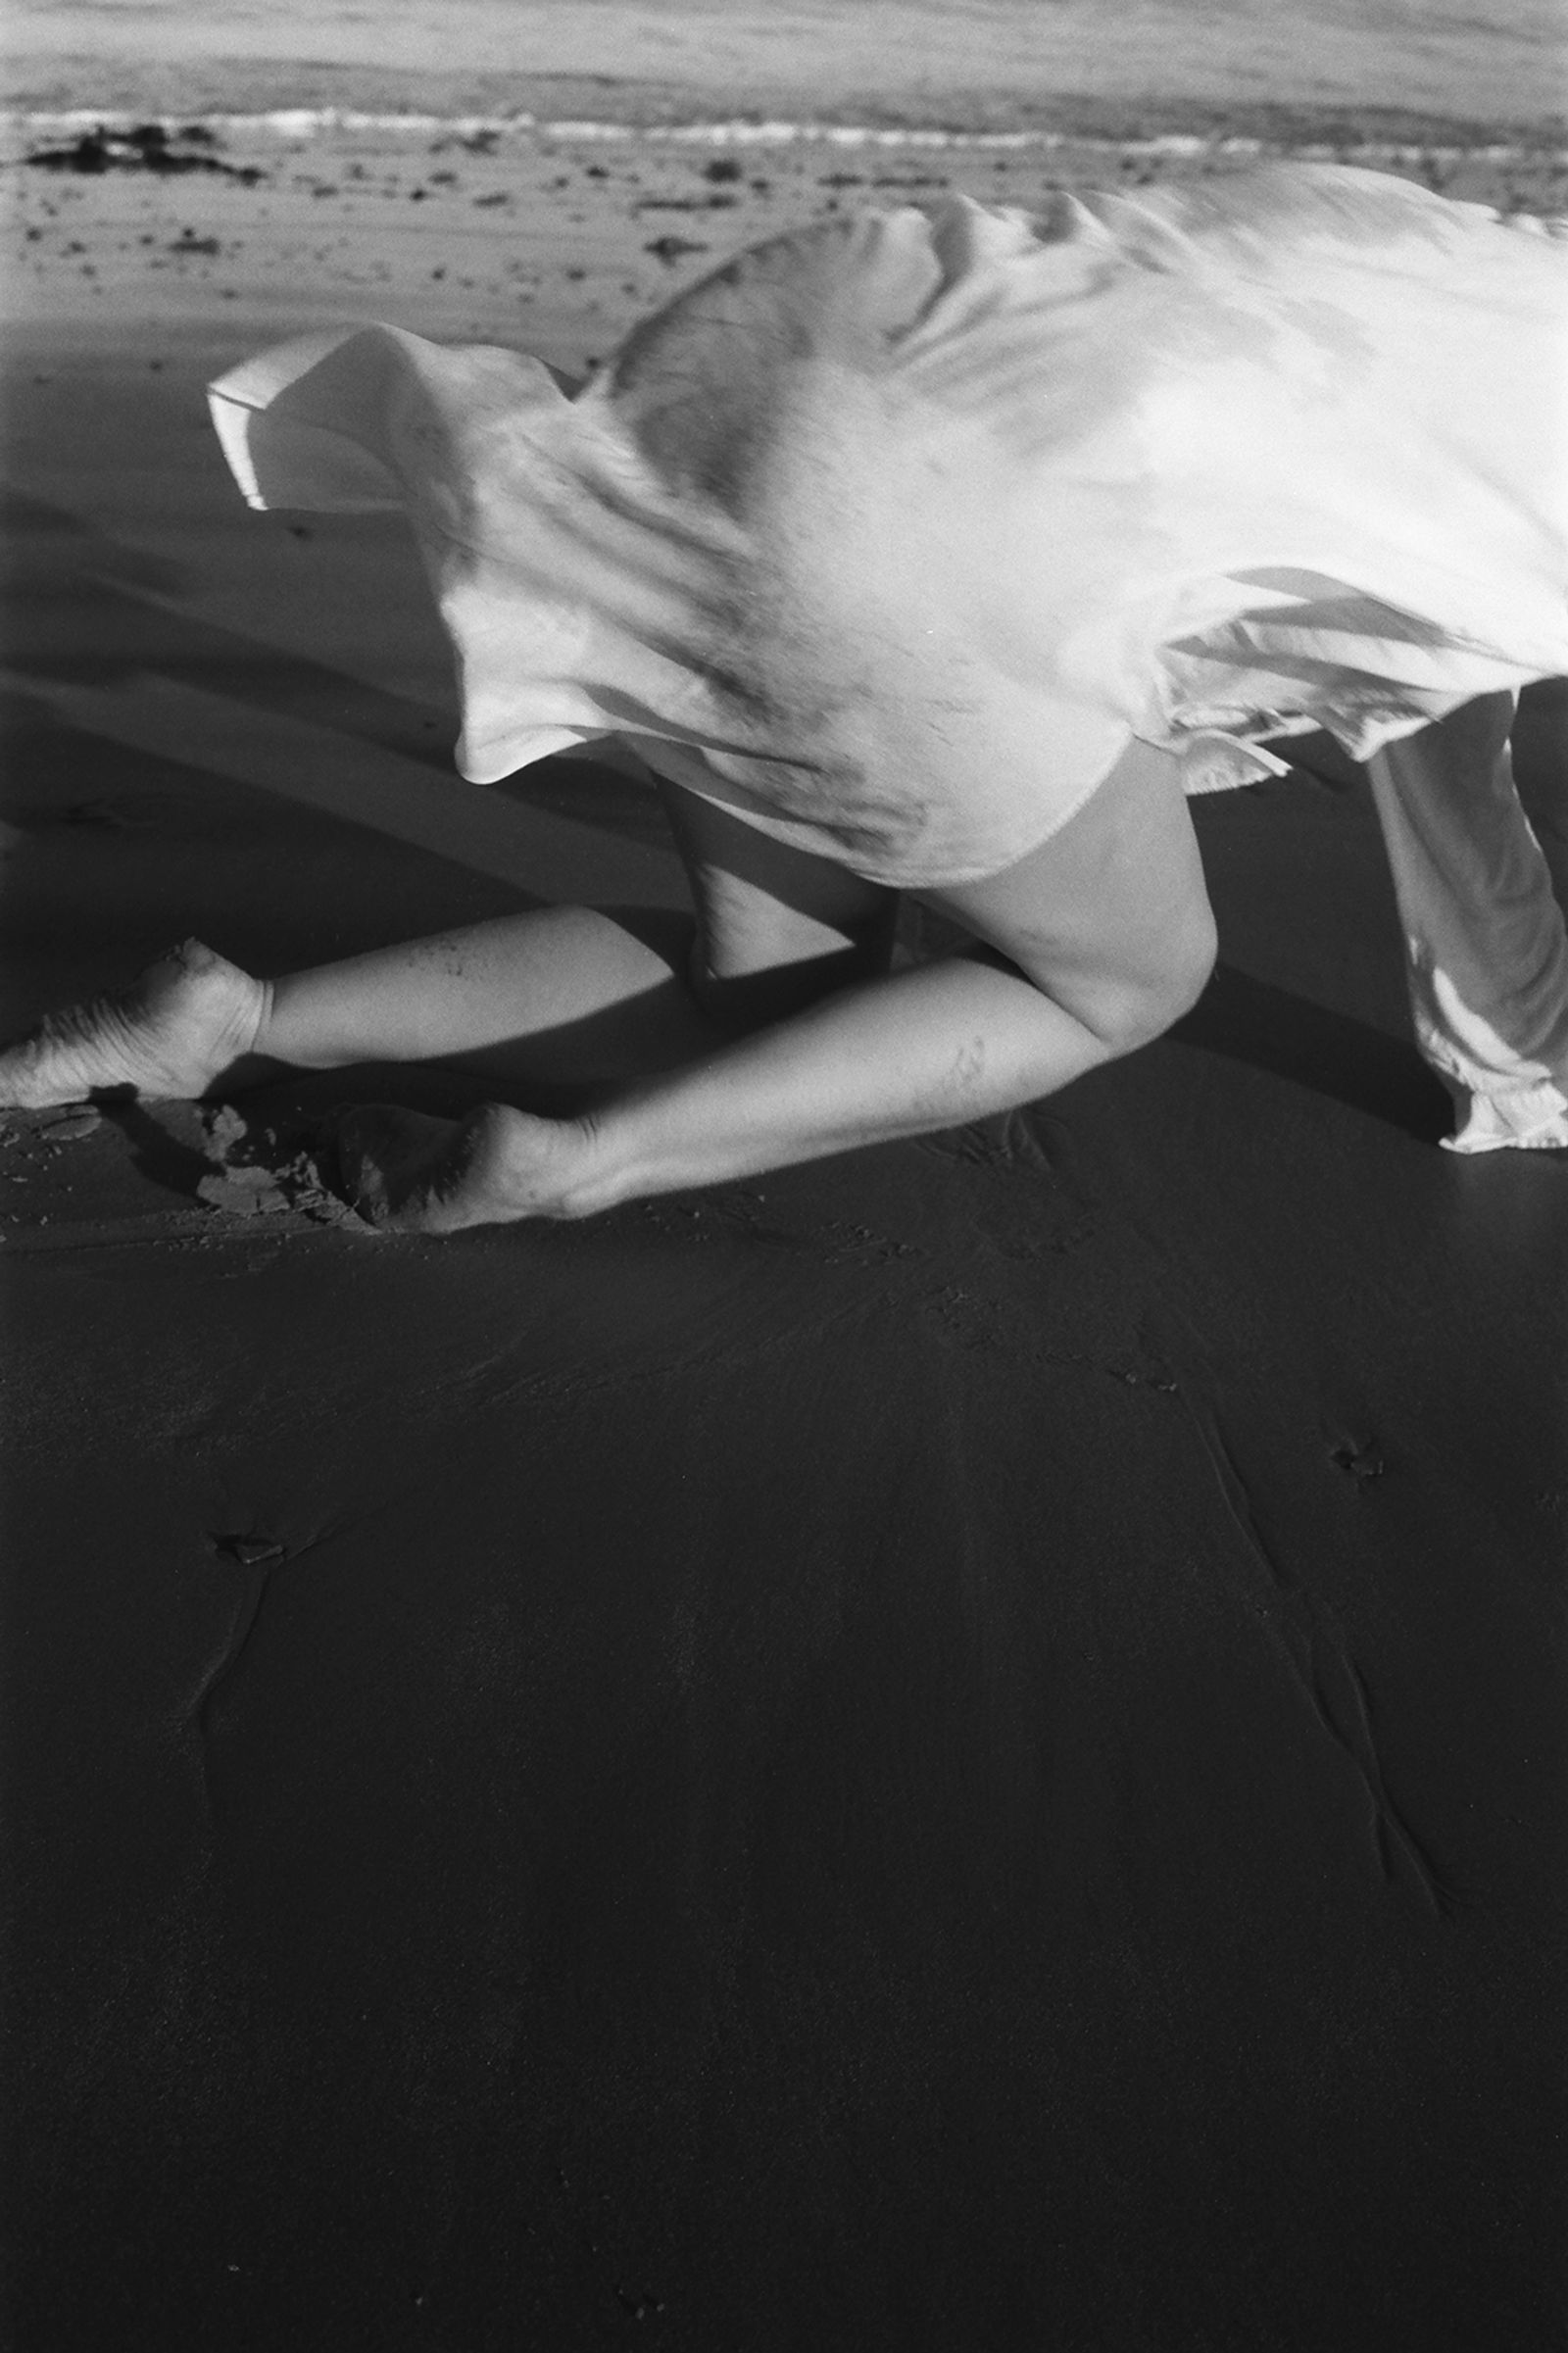 © Gabby Laurent - Image from the Falling photography project